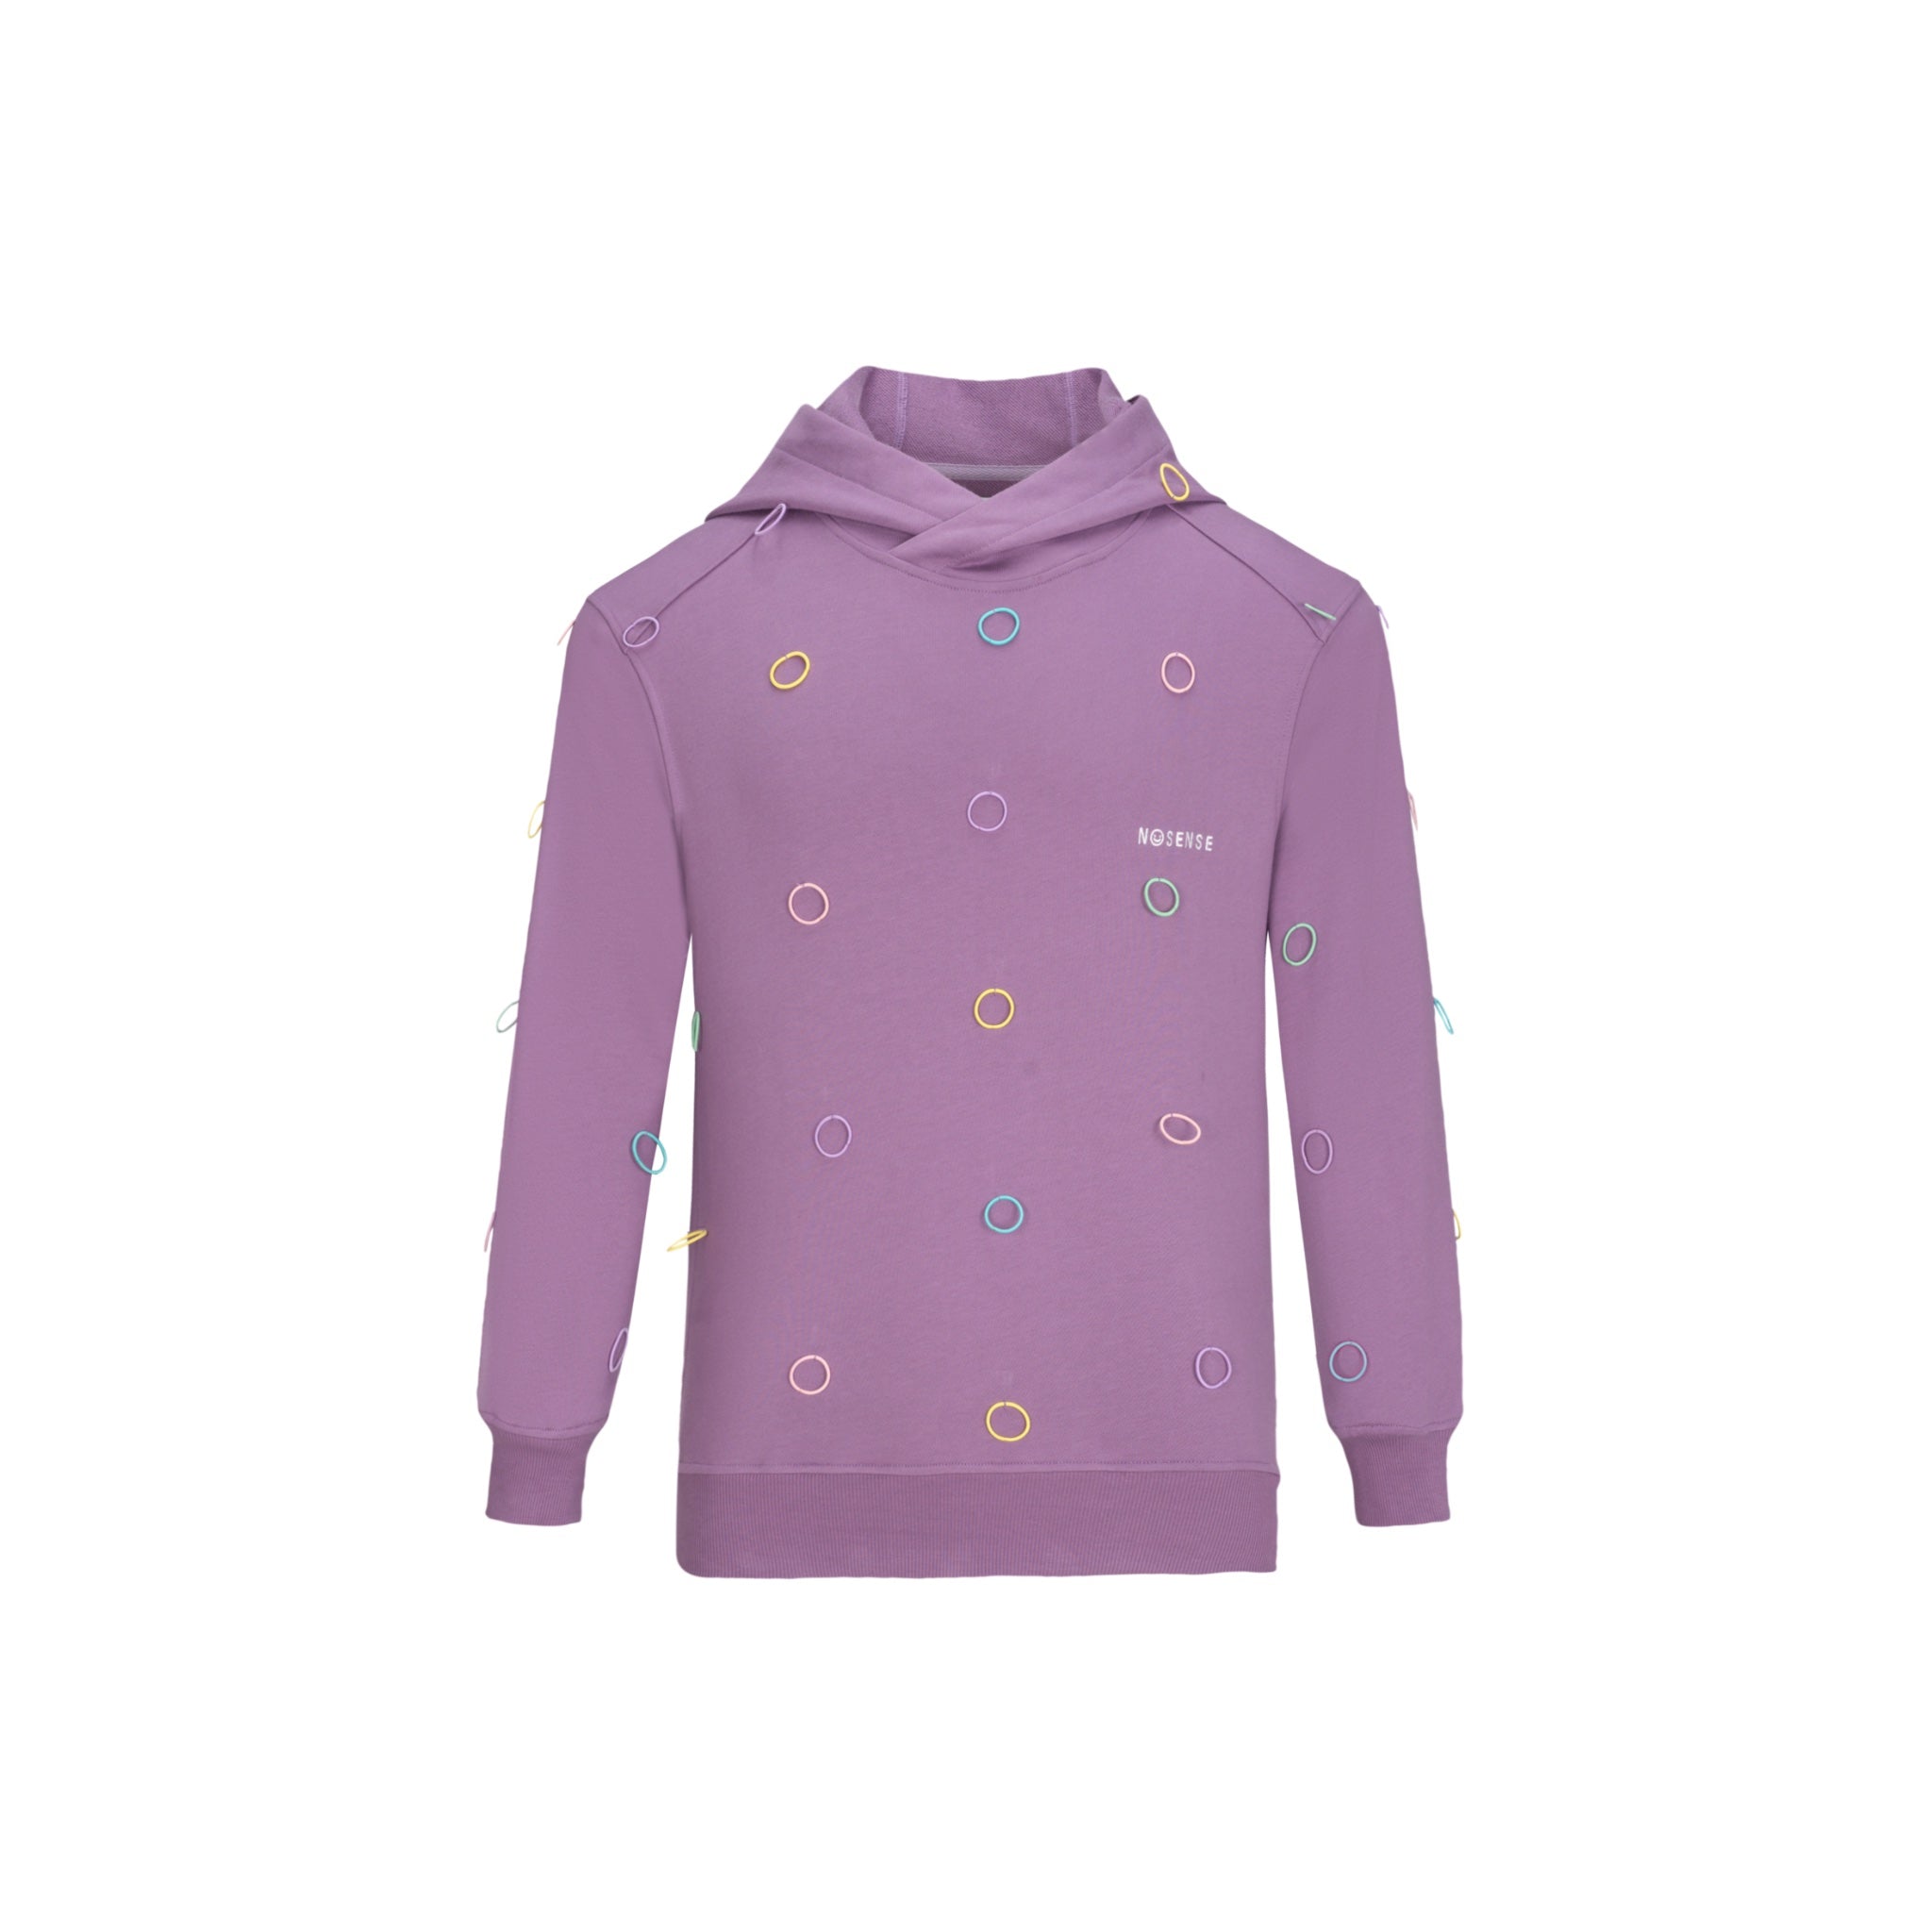 NOSENSE Purple Brand Embroidered Color Circle Hoodie | MADA IN CHINA